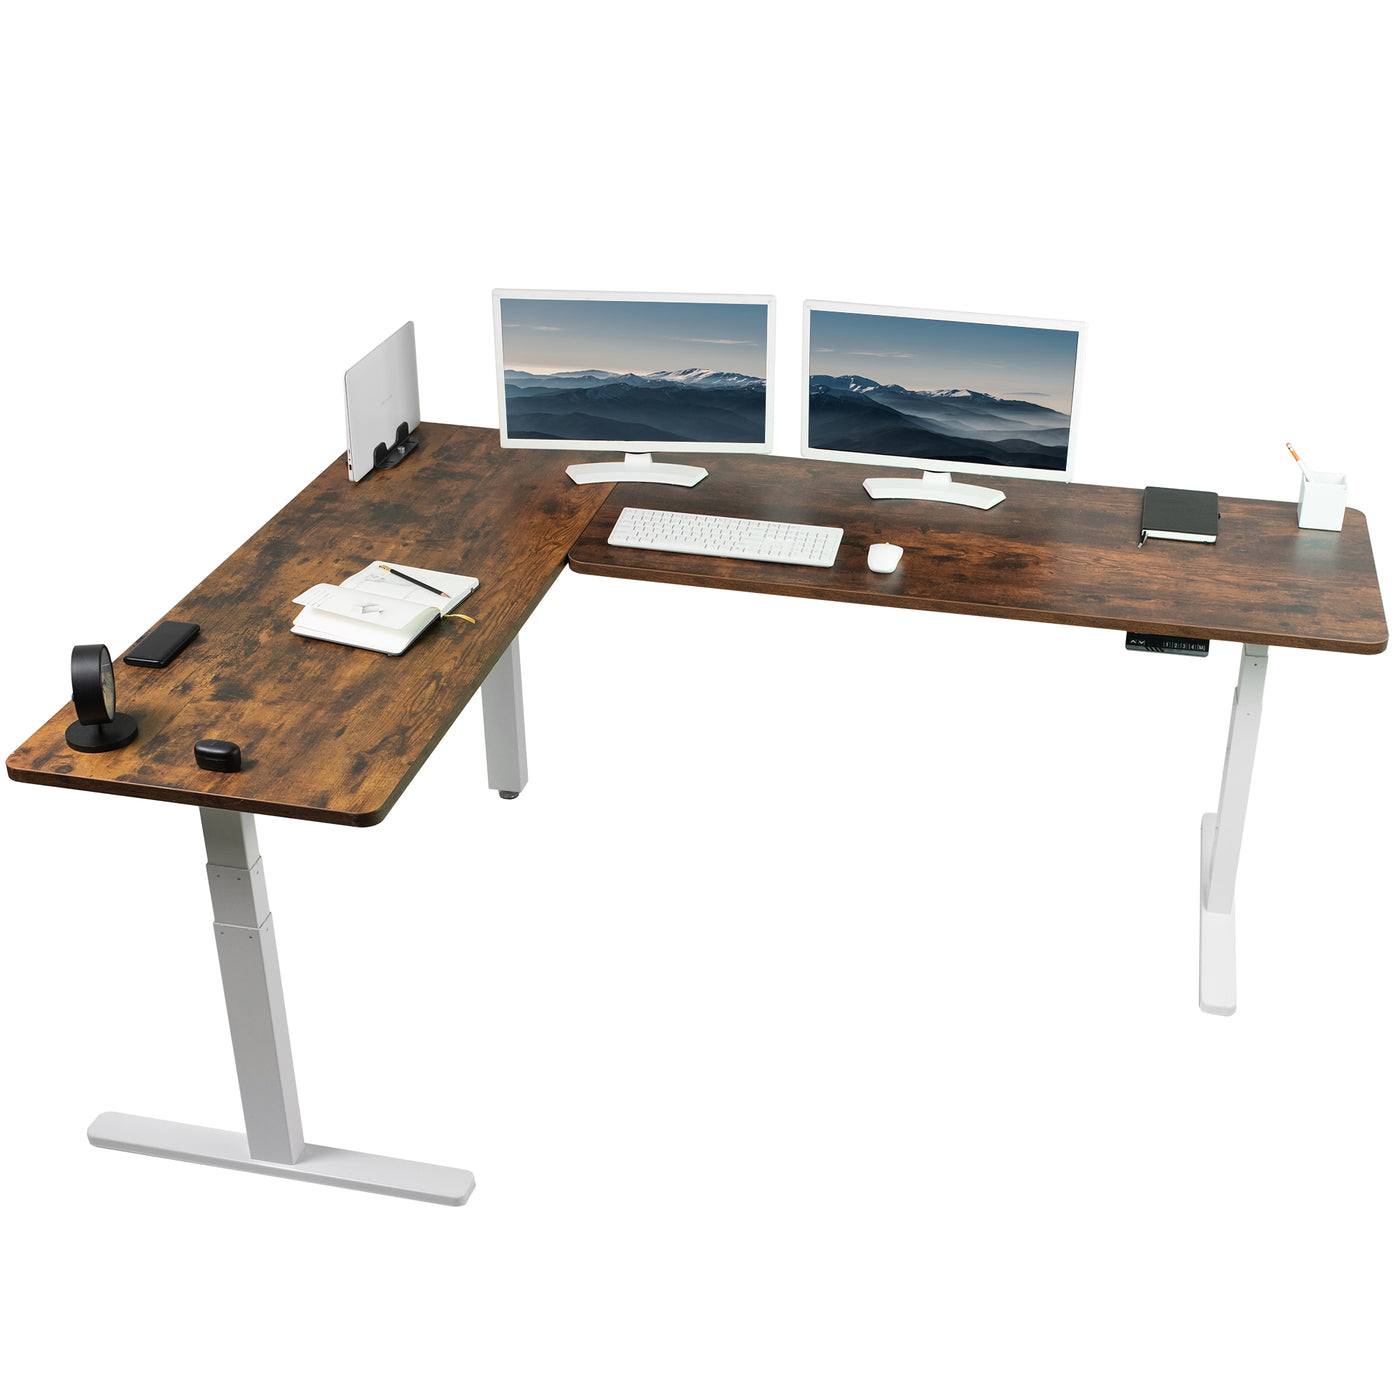 Rustic sturdy height adjustable corner desk workstation with memory controller.